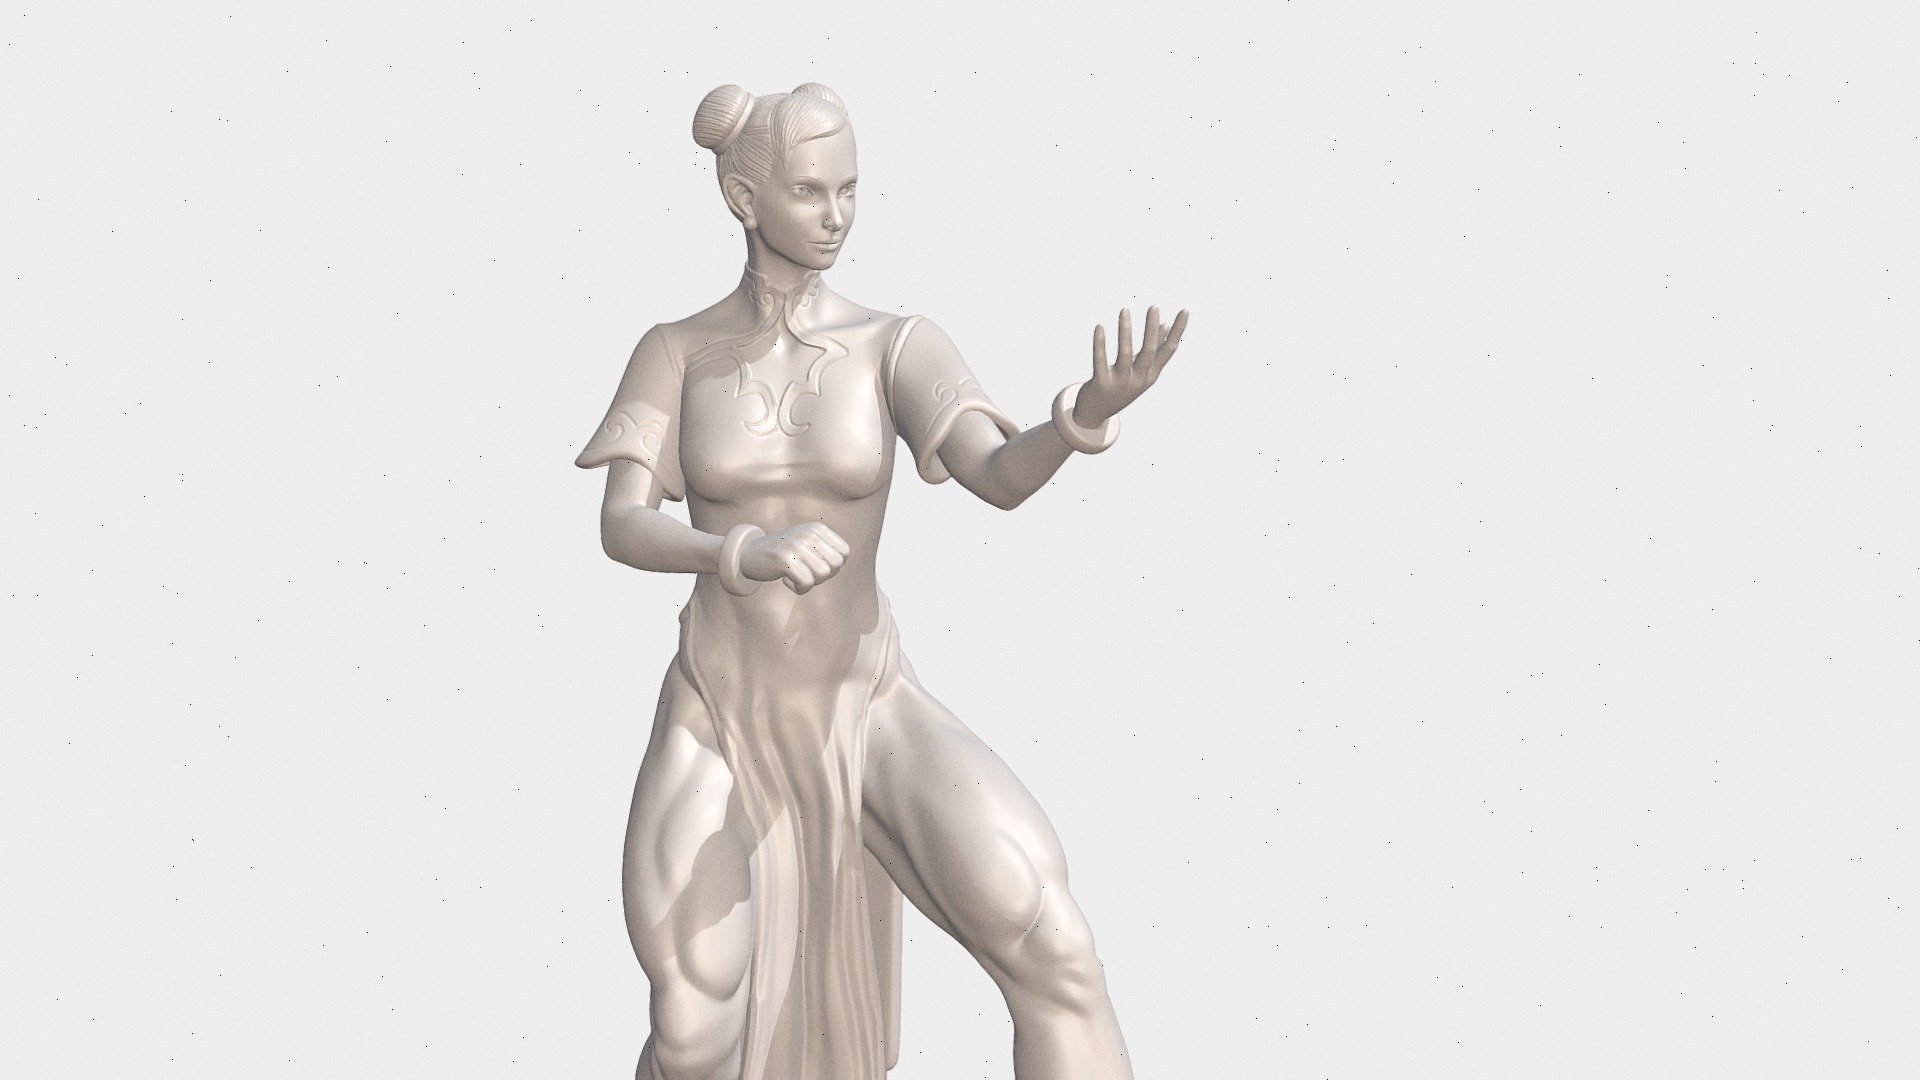 This 3d-print model is based off of Chun-li from Street Fighter 6

she is on her neutral wing chun stance

This model is for sale and can be used for commercial purposes
email me;
xerxess6696@gmail.com
If you would like a link to purchase this model 3d model